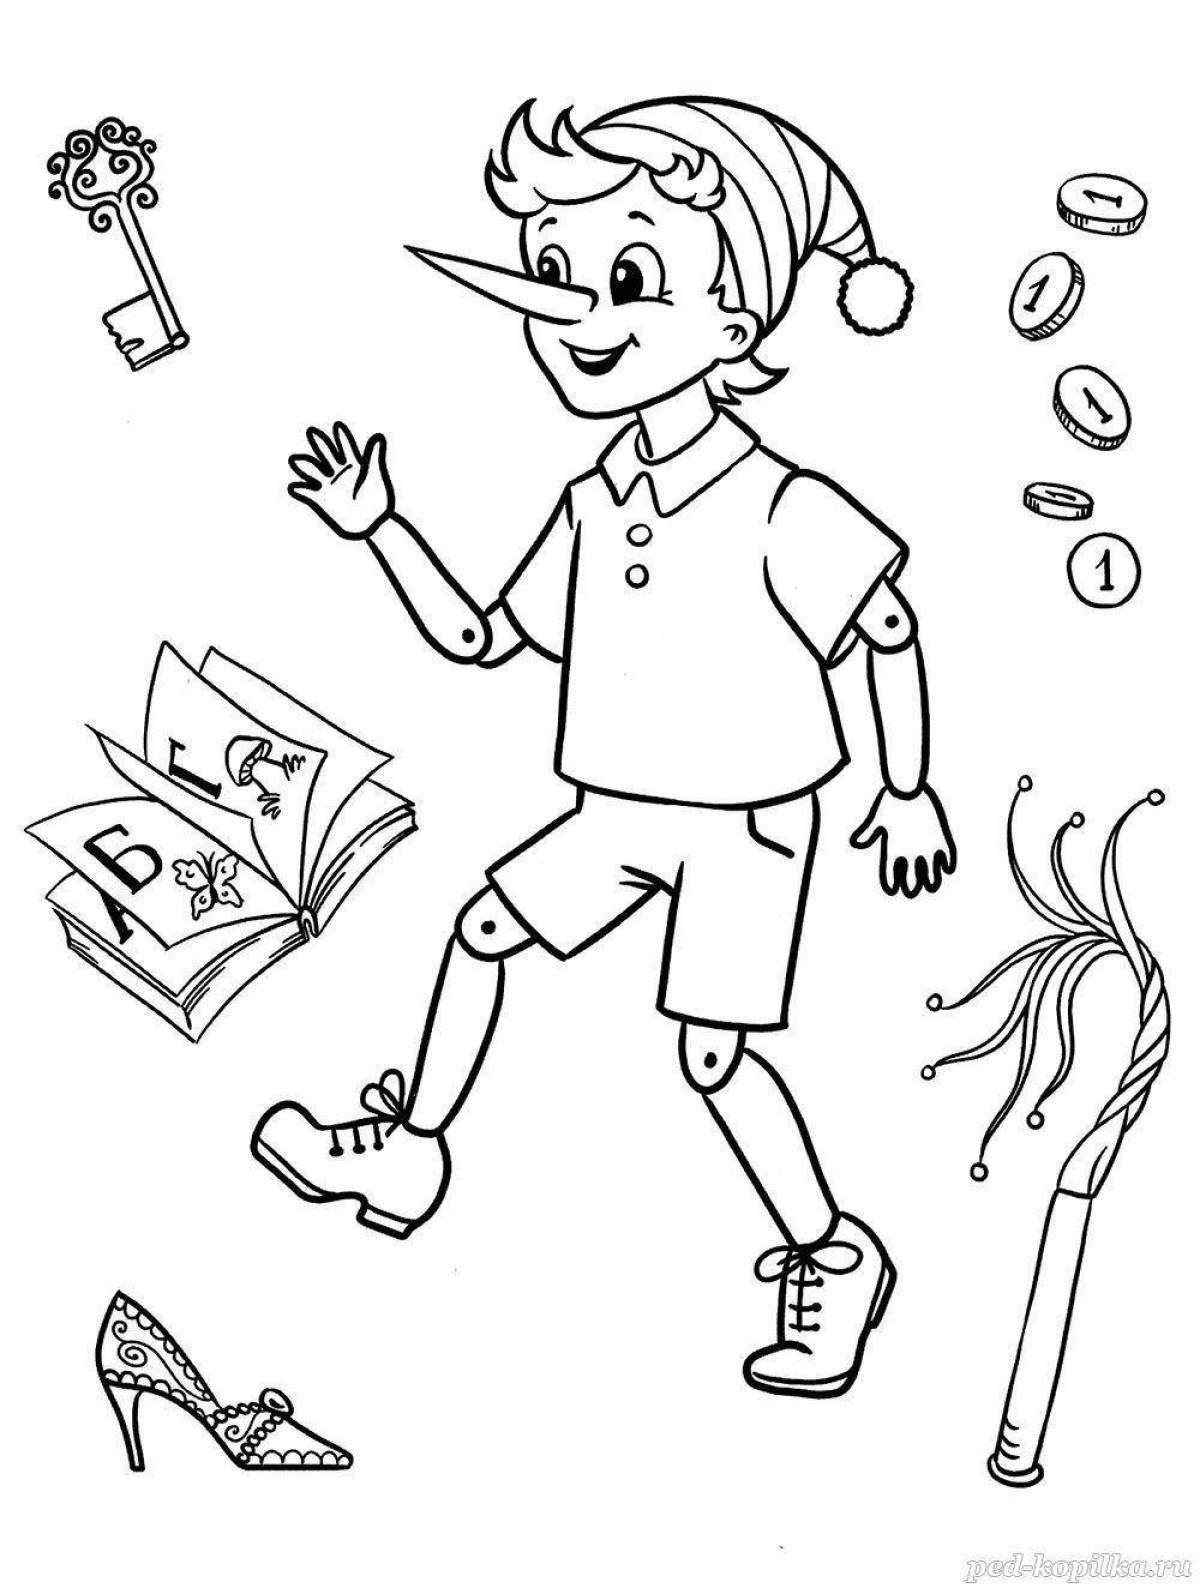 Coloring page charming pinocchio